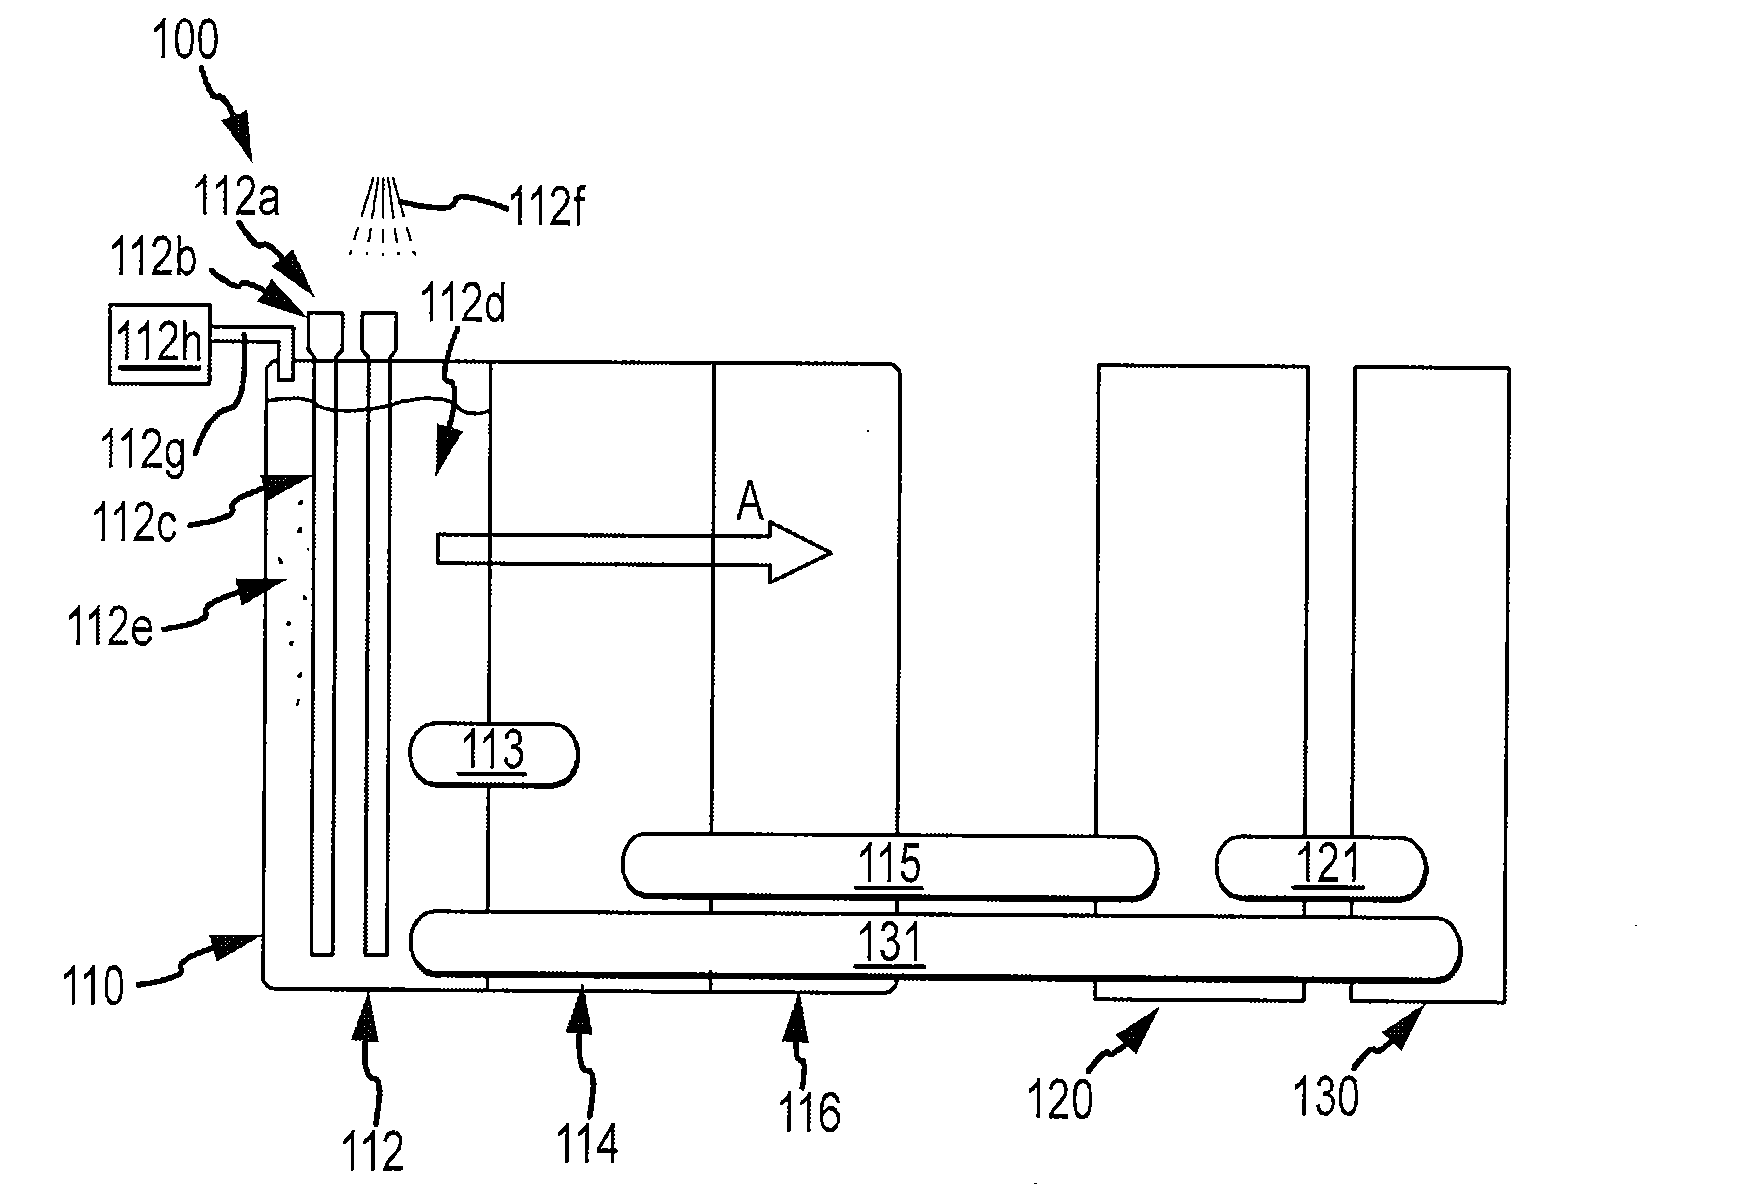 Apparatus and methods for production of biodiesel